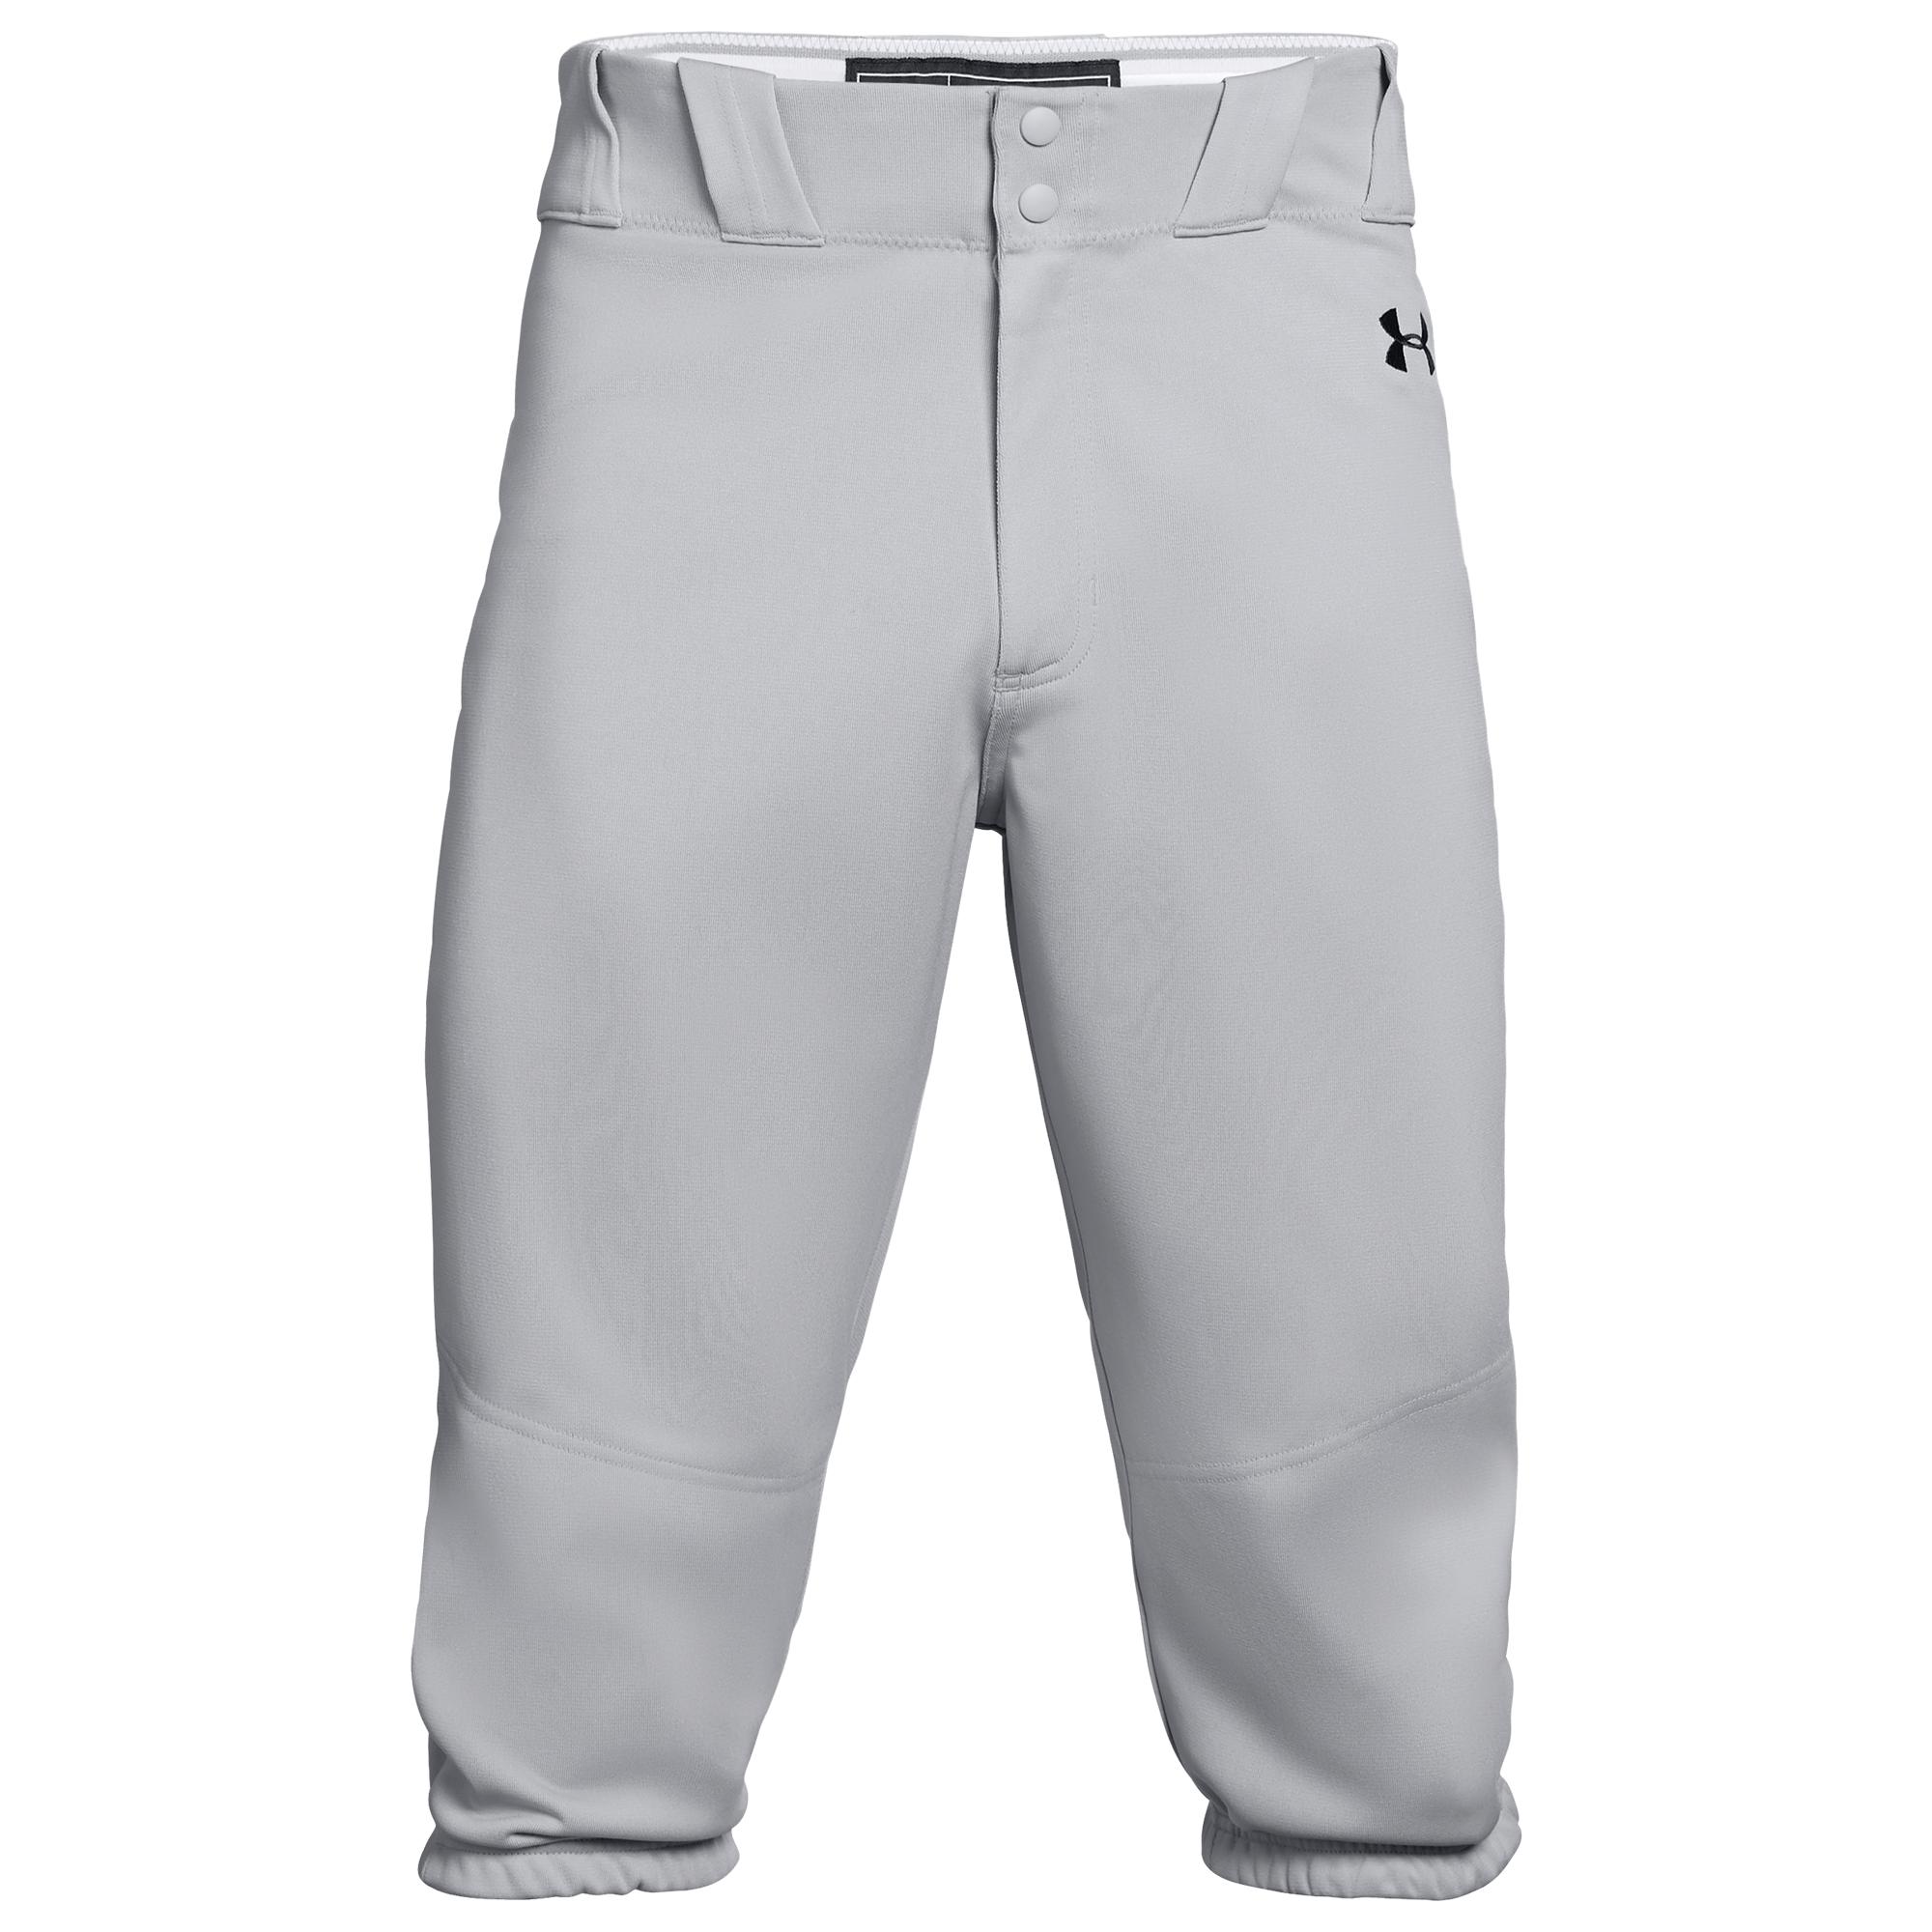 Under Armour Team Icon Knicker Baseball Pants in Gray for Men - Lyst